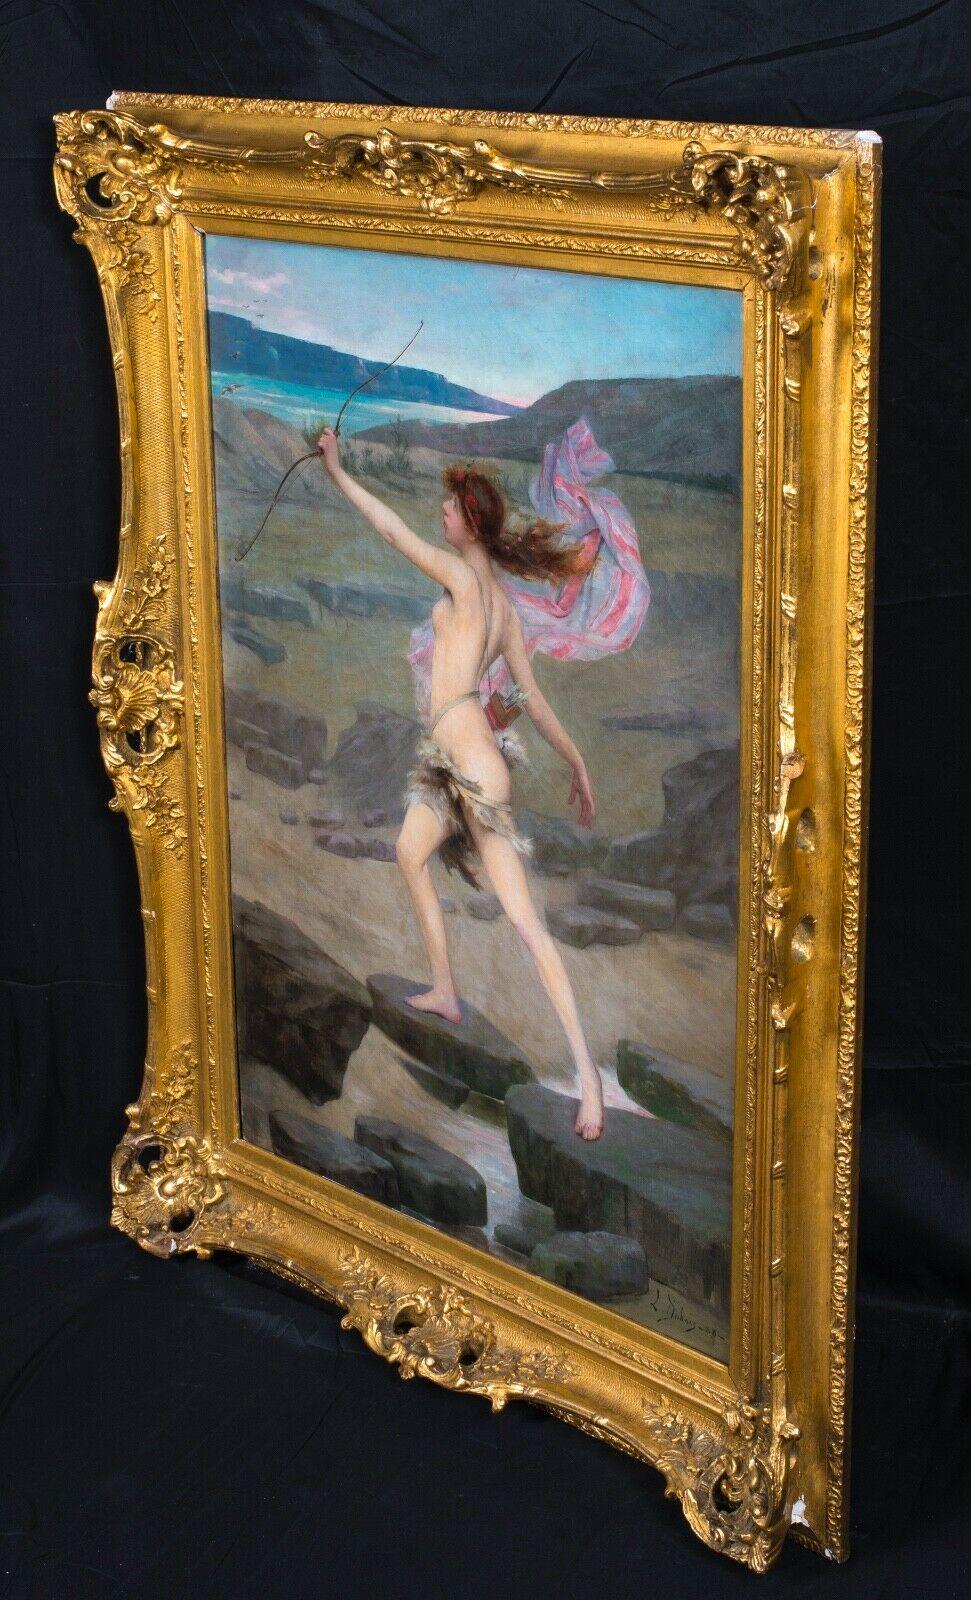 Portrait Of A Nude Girl as Huntress Diana, dated 1888

by Louis Auguste DUBOIS (1846-1890)

Fine large 19th Century French classical scene of a nude girl posing as the Goddess Diana, oil on canvas by Luis Dubois. Beautiful full length side profile